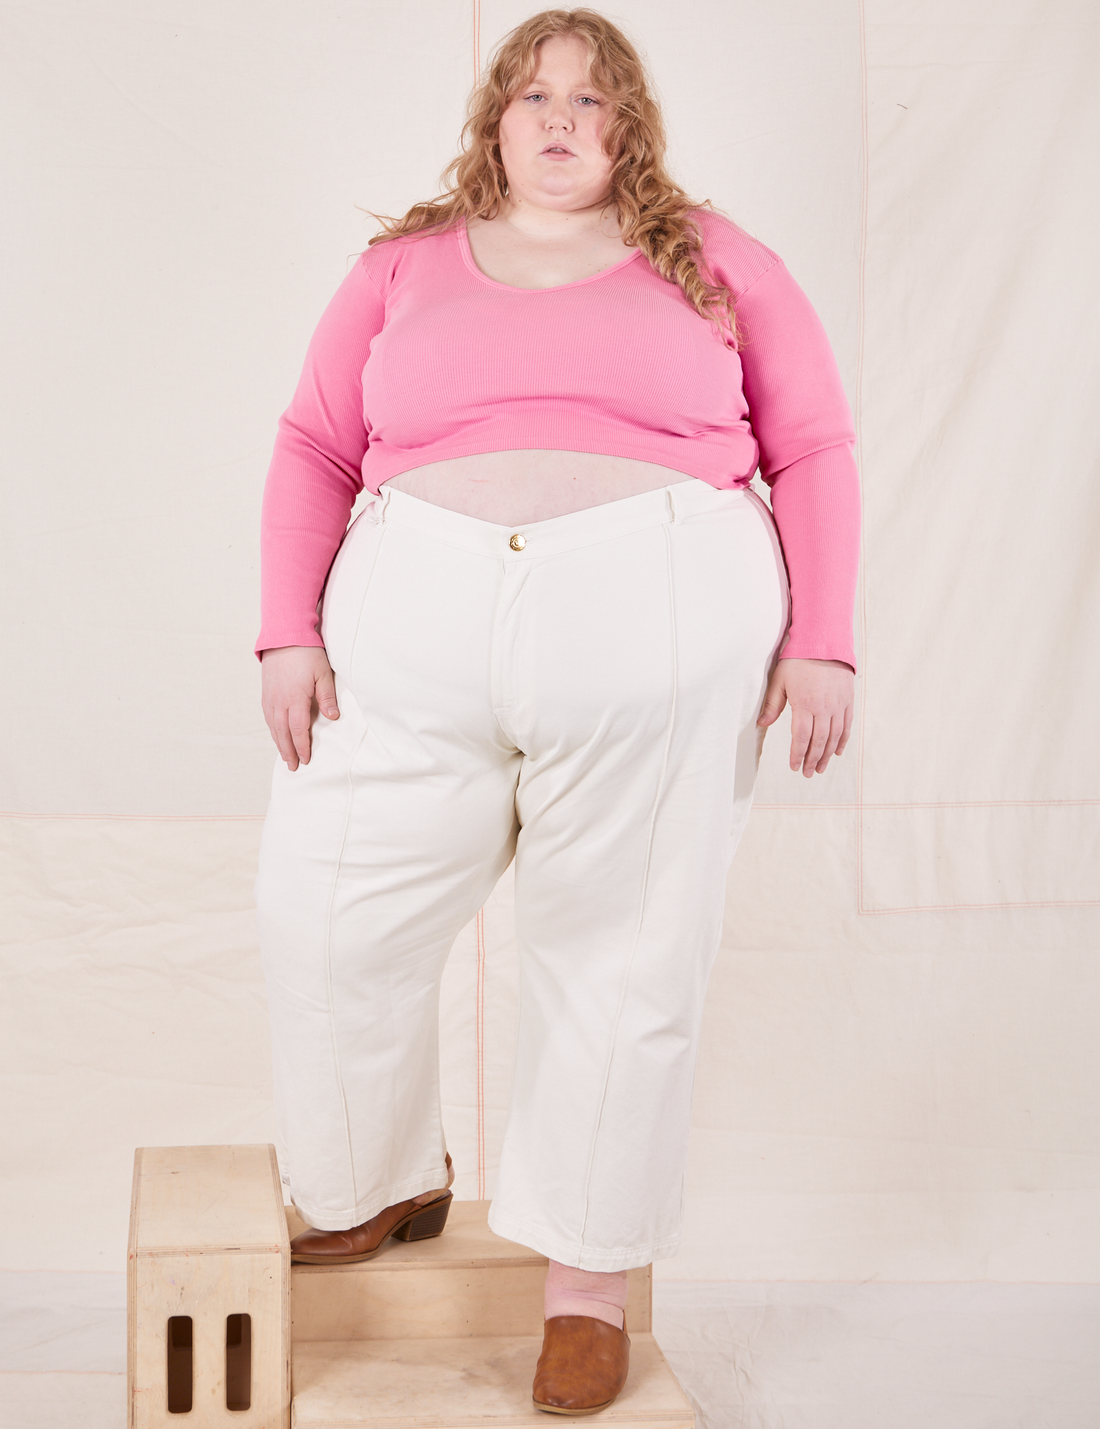 Catie is wearing Long Sleeve V-Neck Tee in Bubblegum Pink and vintage off-white Western Pants